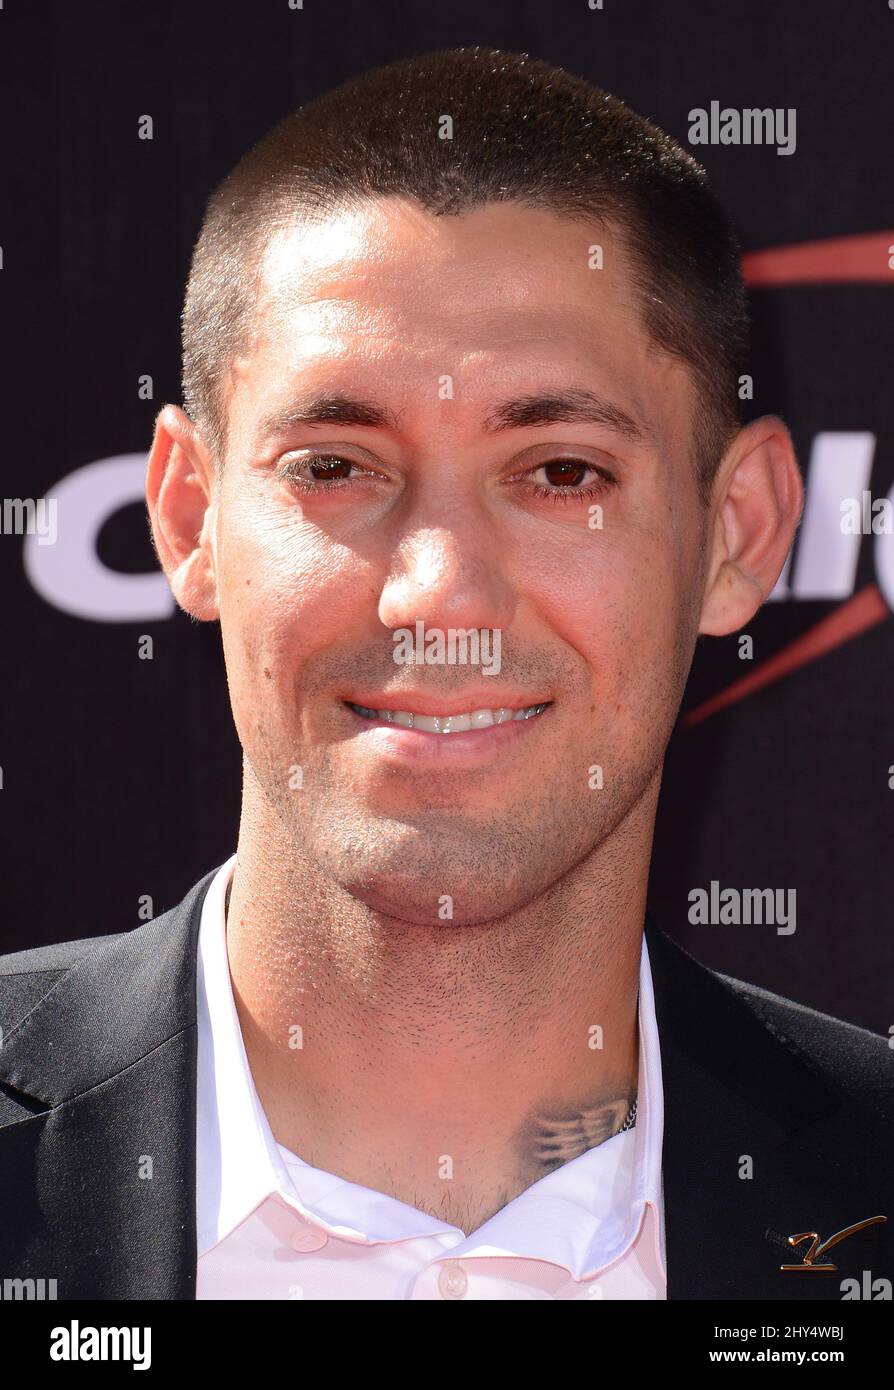 Clint Dempsey arriving at the 2014 ESPYS held at Nokia Theatre, L.A. Live. Stock Photo